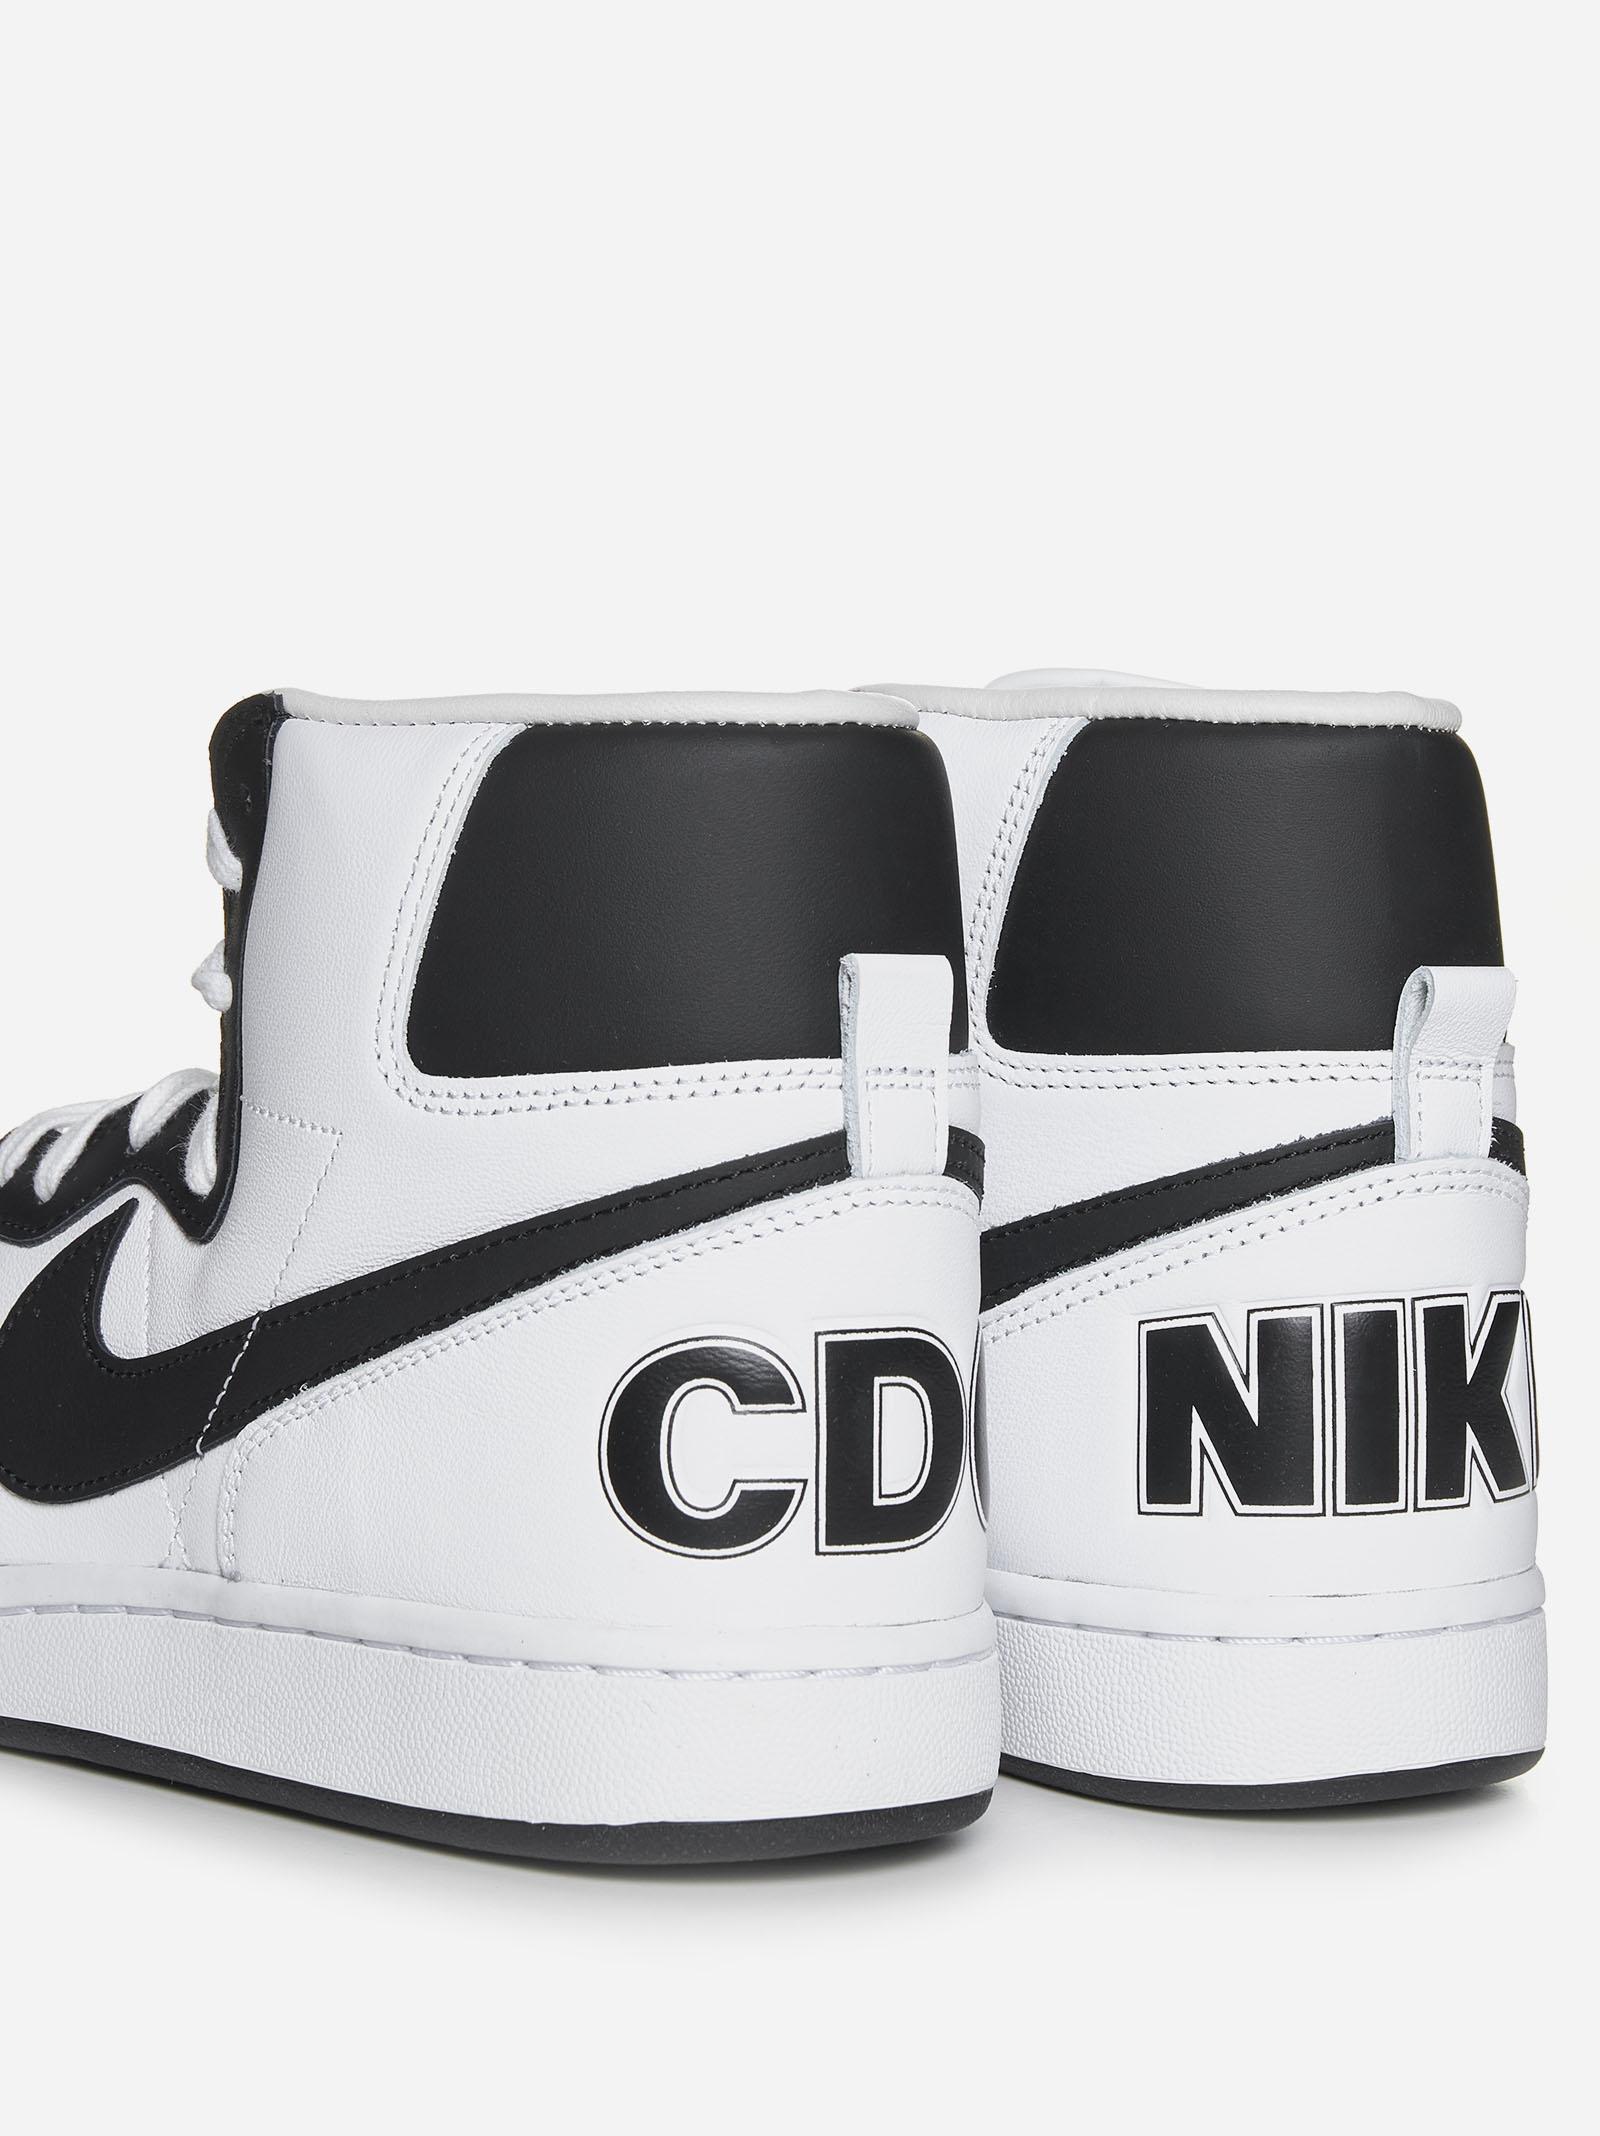 NIKE Terminator Leather High-Top Sneakers for Men